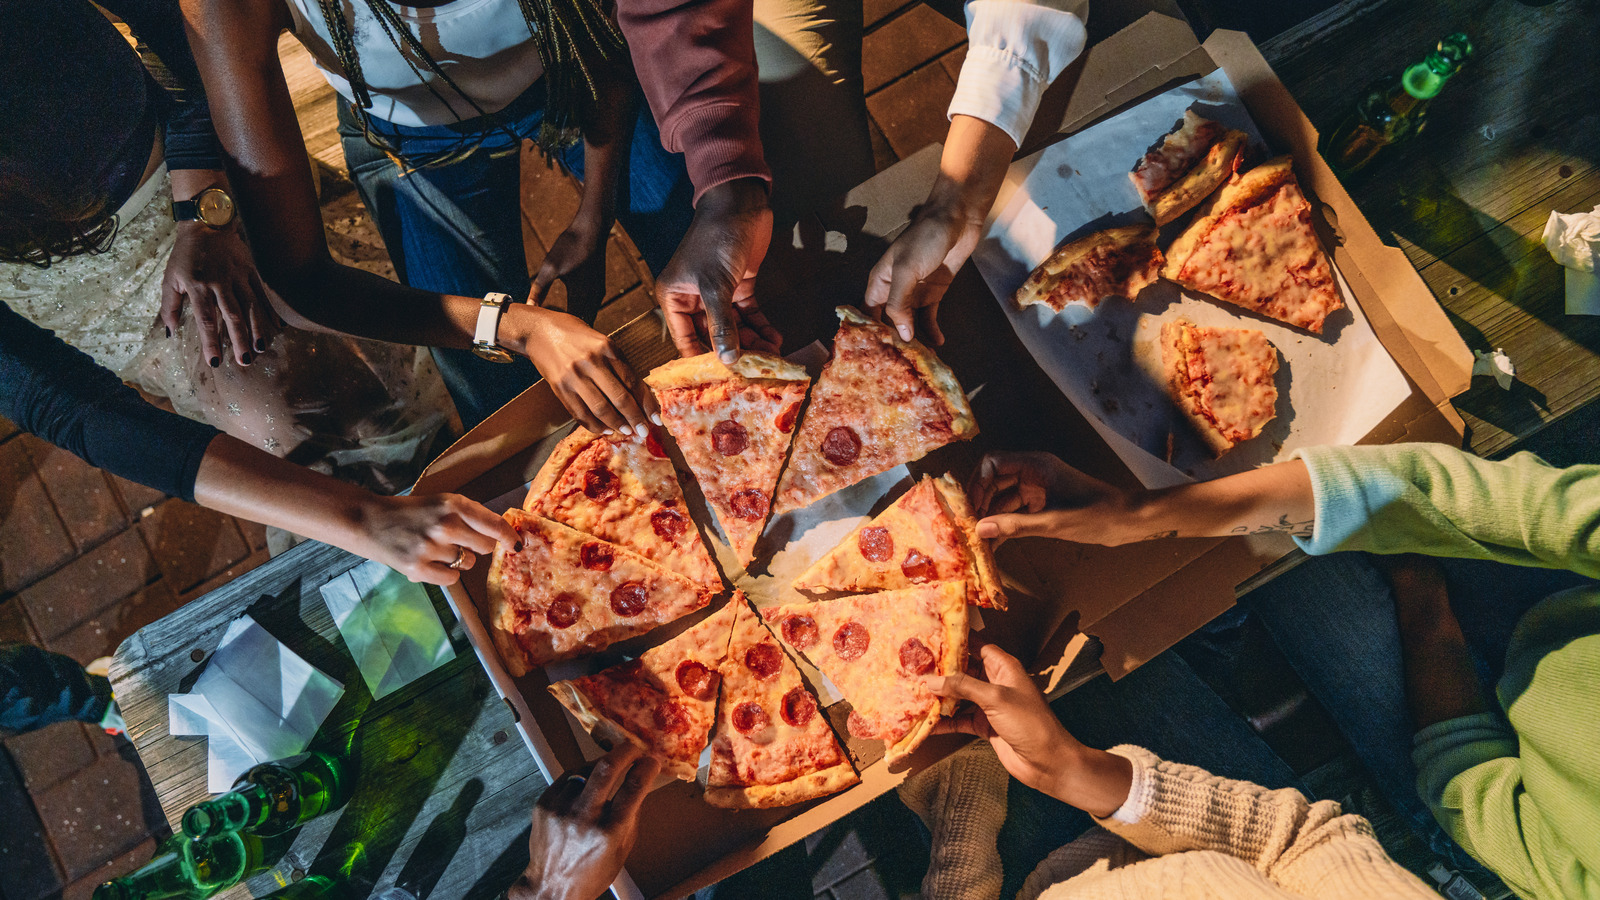 How To Portion Out Pizzas For 20 Very Hungry Friends